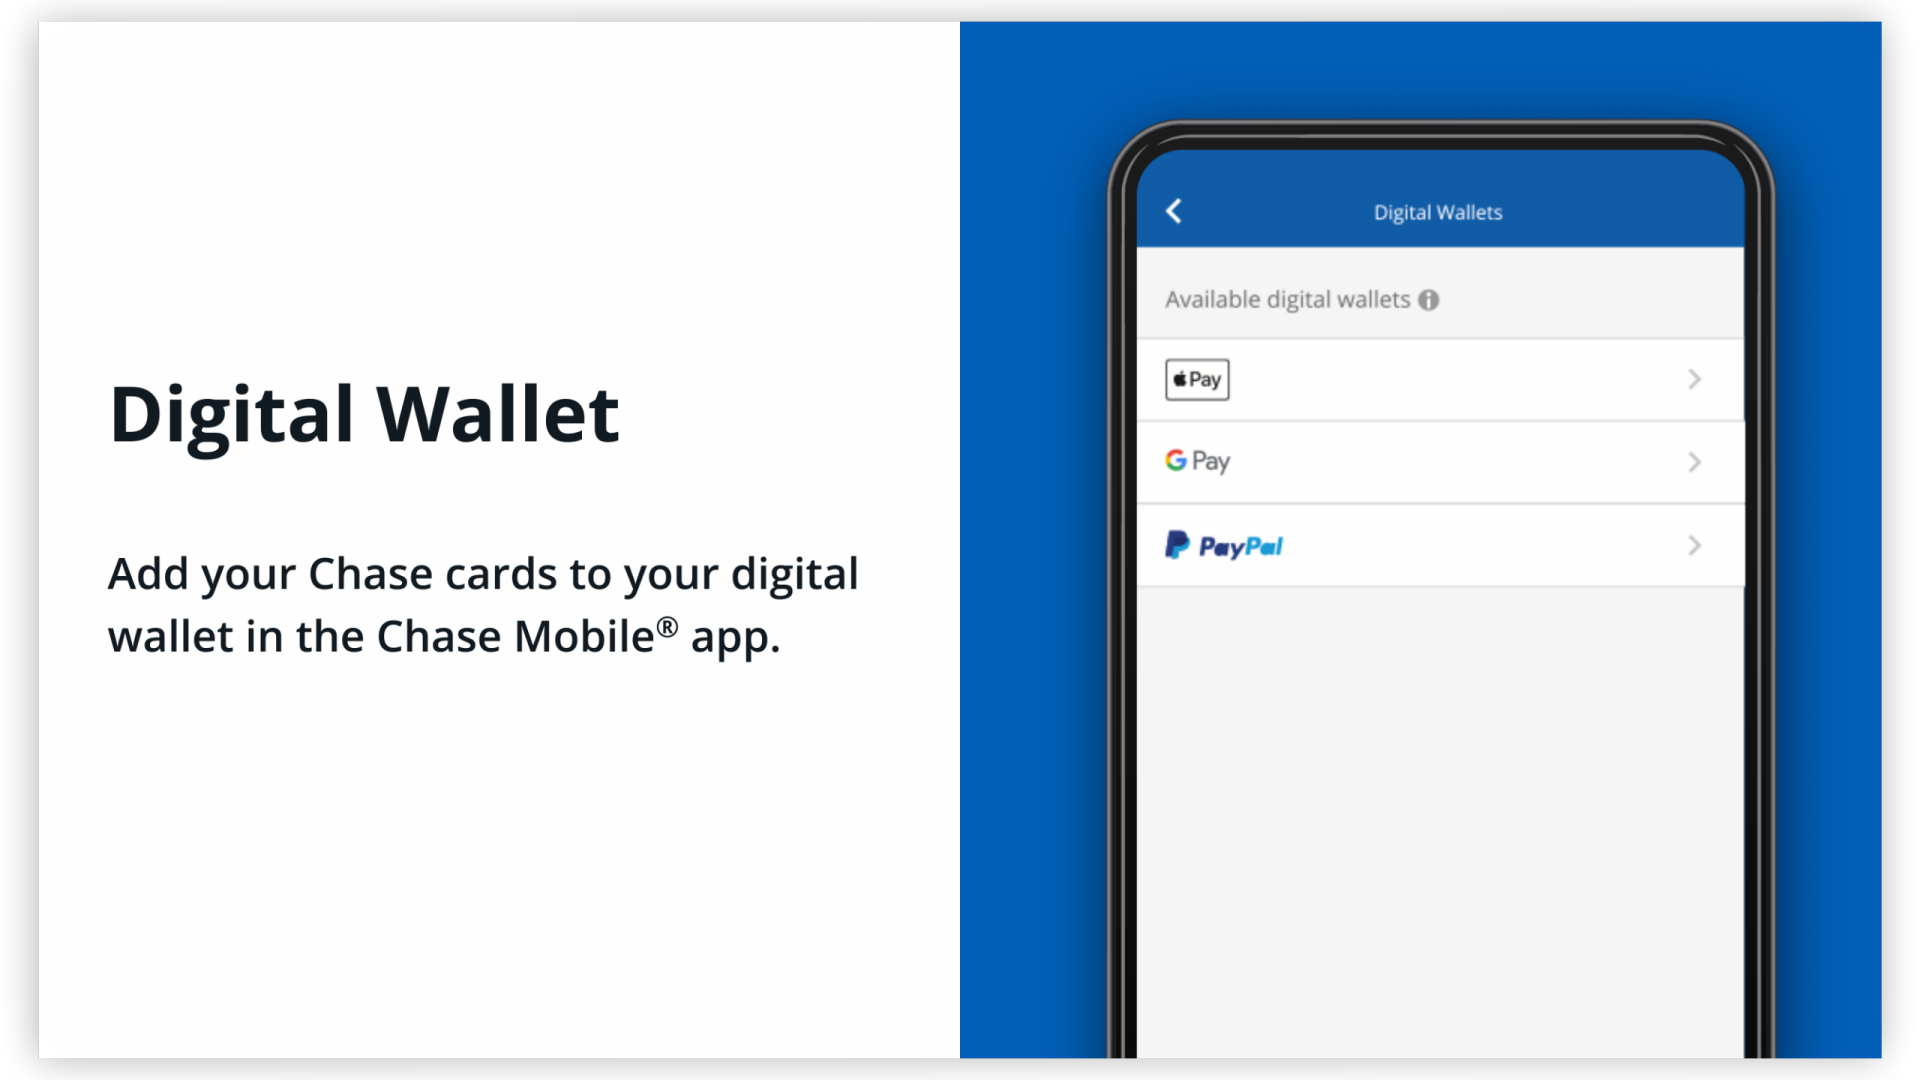 How To Add To Your Digital Wallet